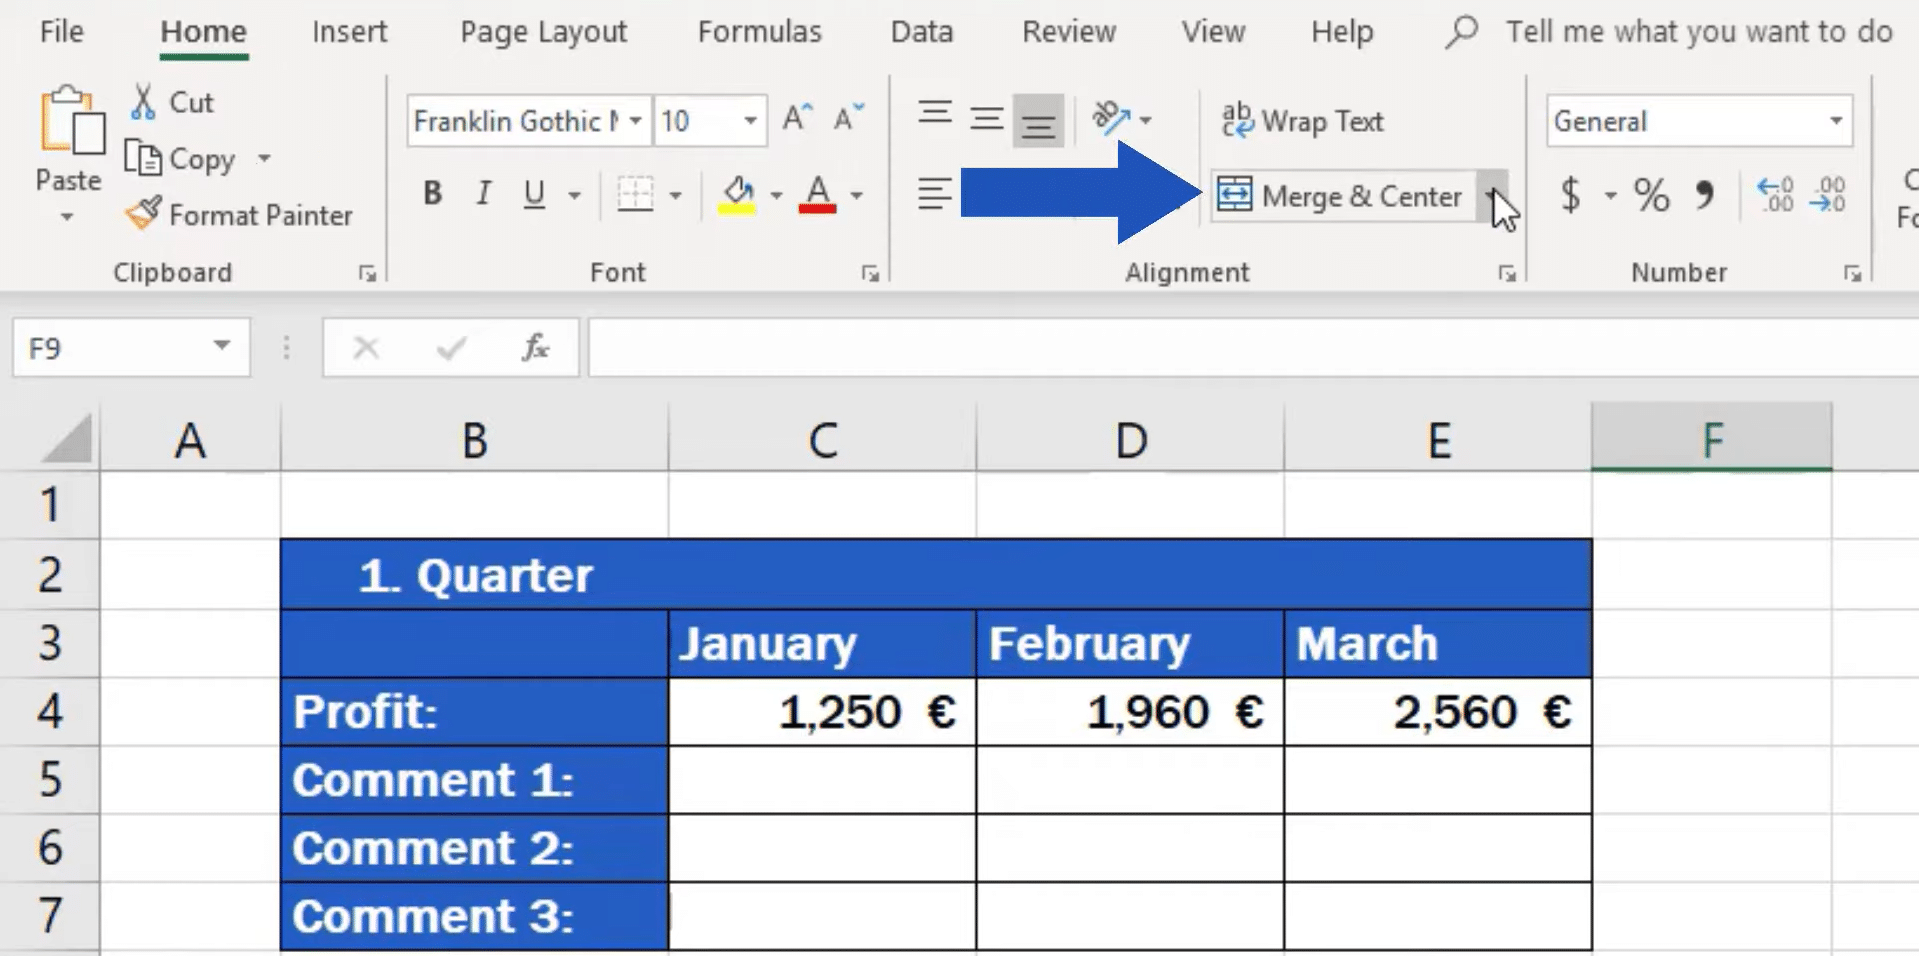 Column Merge in Excel is a useful feature that allows users to combine multiple columns into a single column. This can be particularly useful when dealing with large data sets or creating a more organized and easily readable layout.